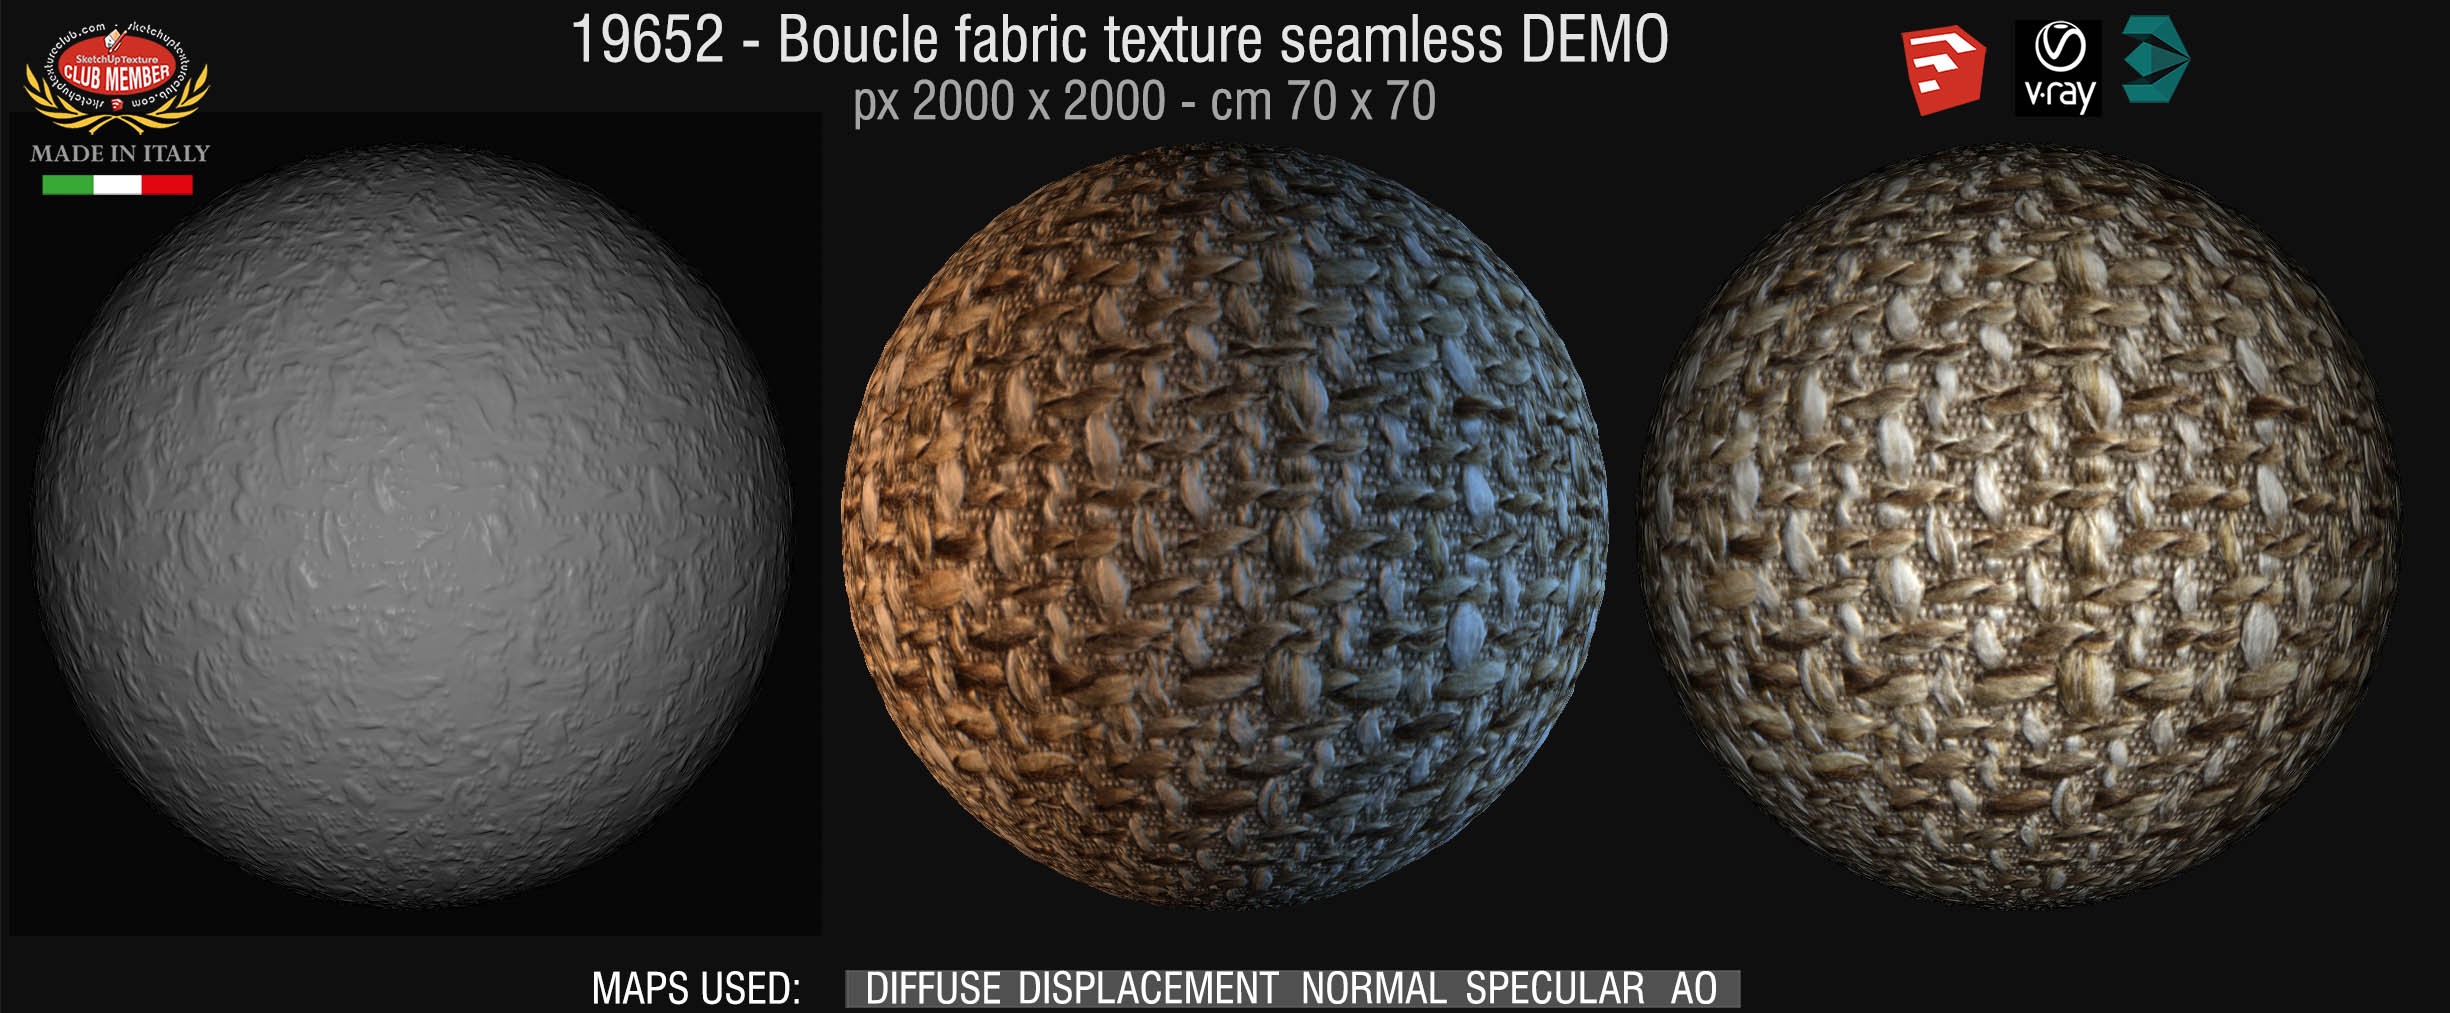 19652 Boucle fabric texture seamless + maps DEMO